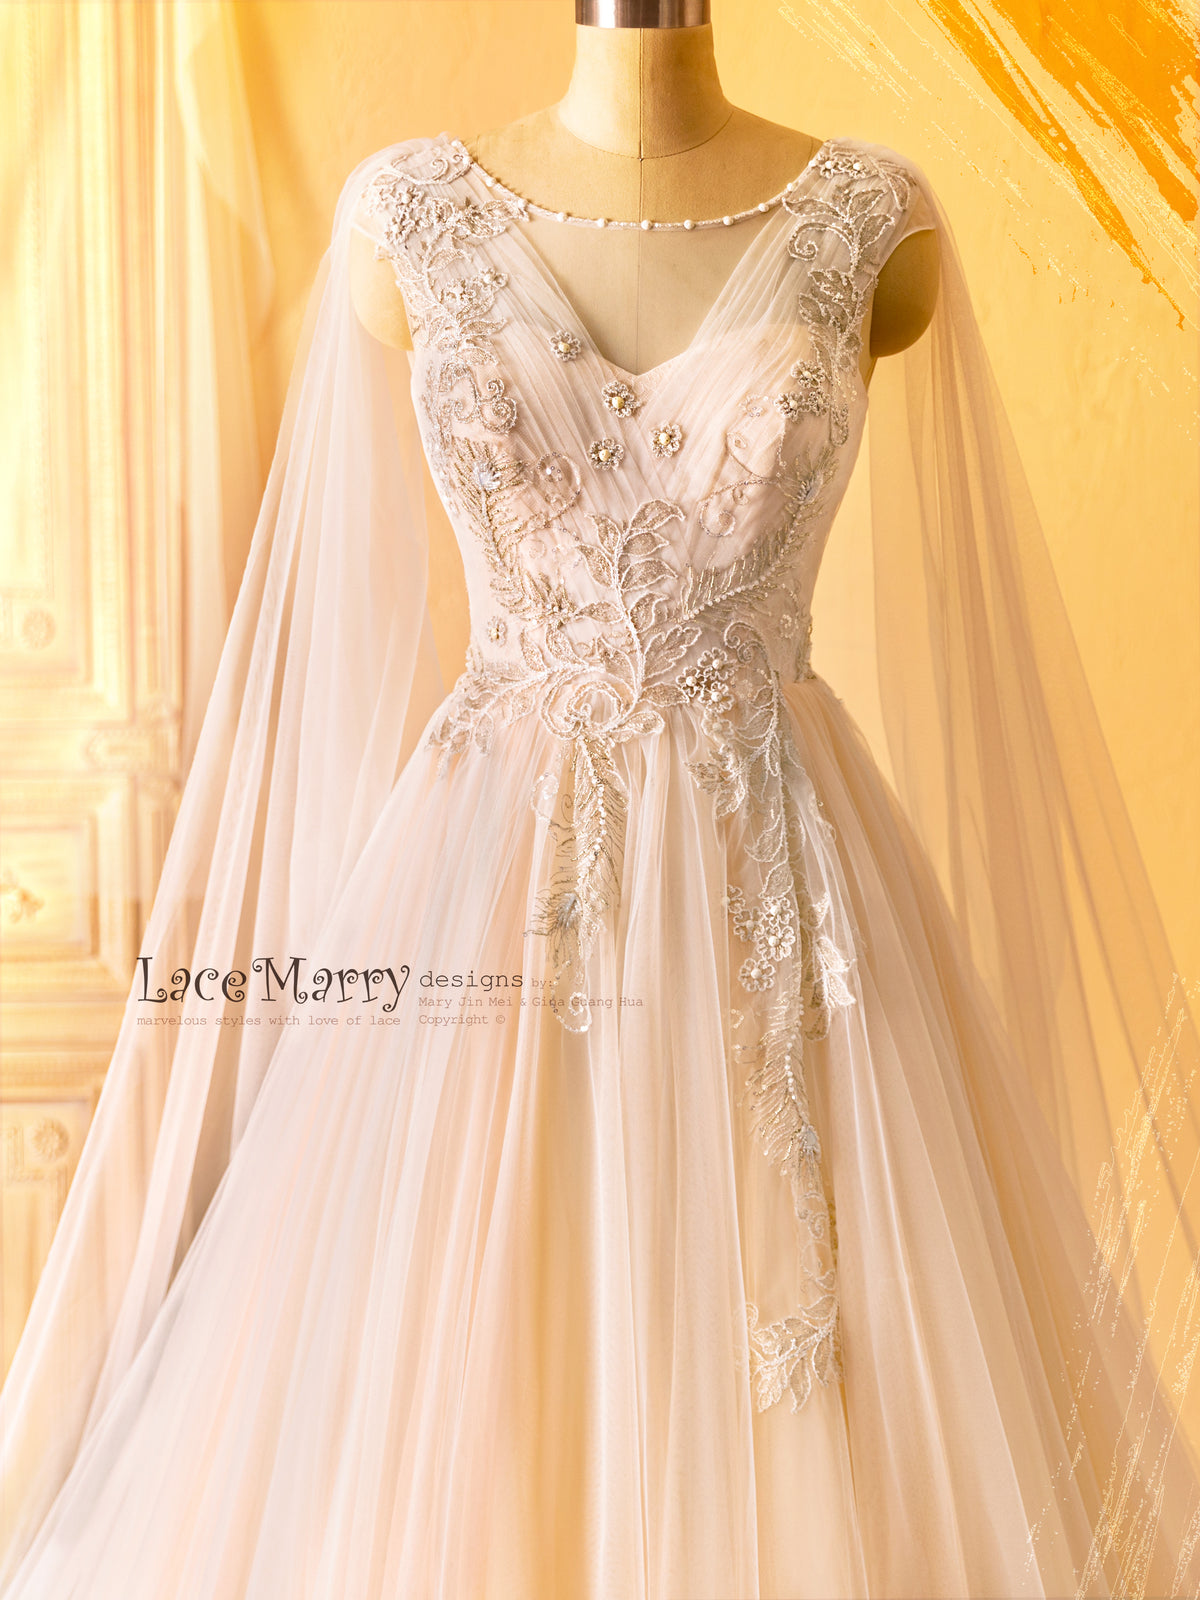 Fairytale Wedding Dress with Tulle Cape Sleeves